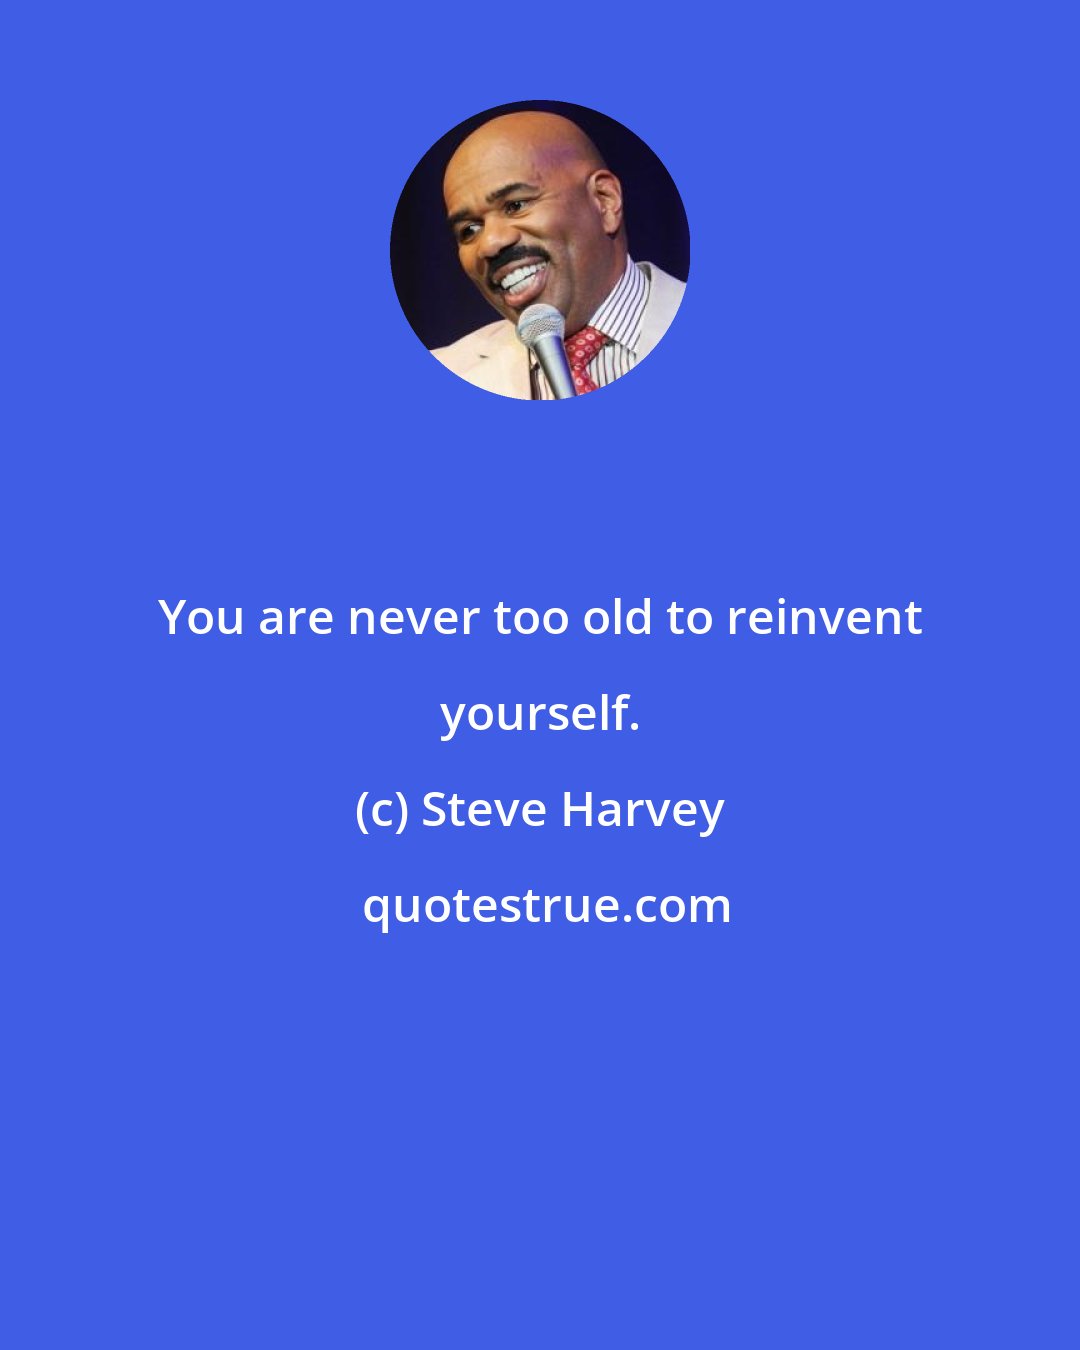 Steve Harvey: You are never too old to reinvent yourself.